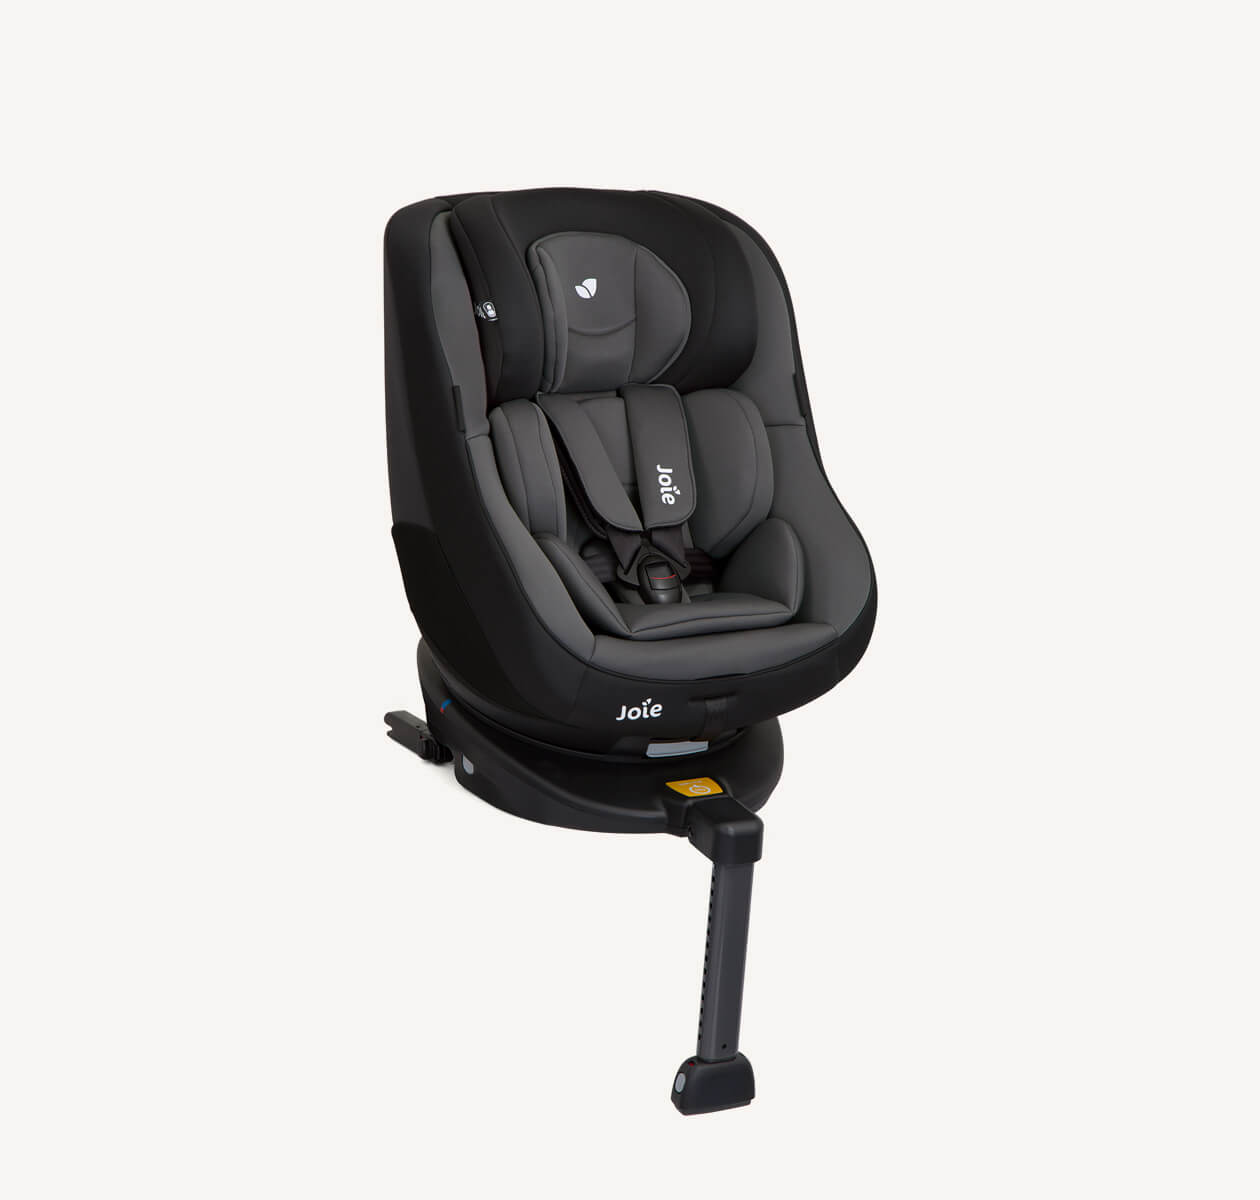 Joie spin 360 car seat in gray and black at an angle.